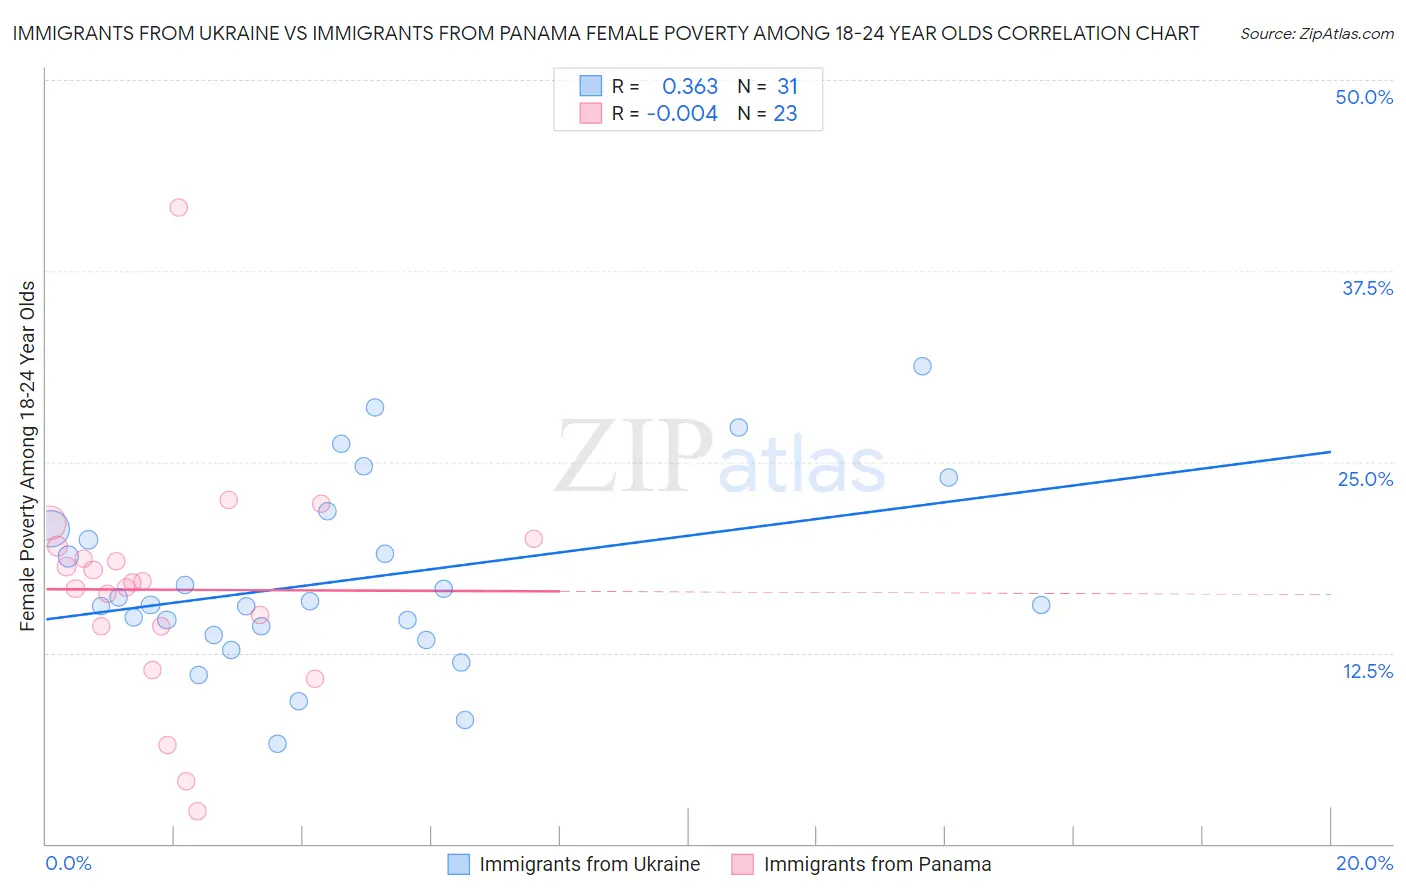 Immigrants from Ukraine vs Immigrants from Panama Female Poverty Among 18-24 Year Olds